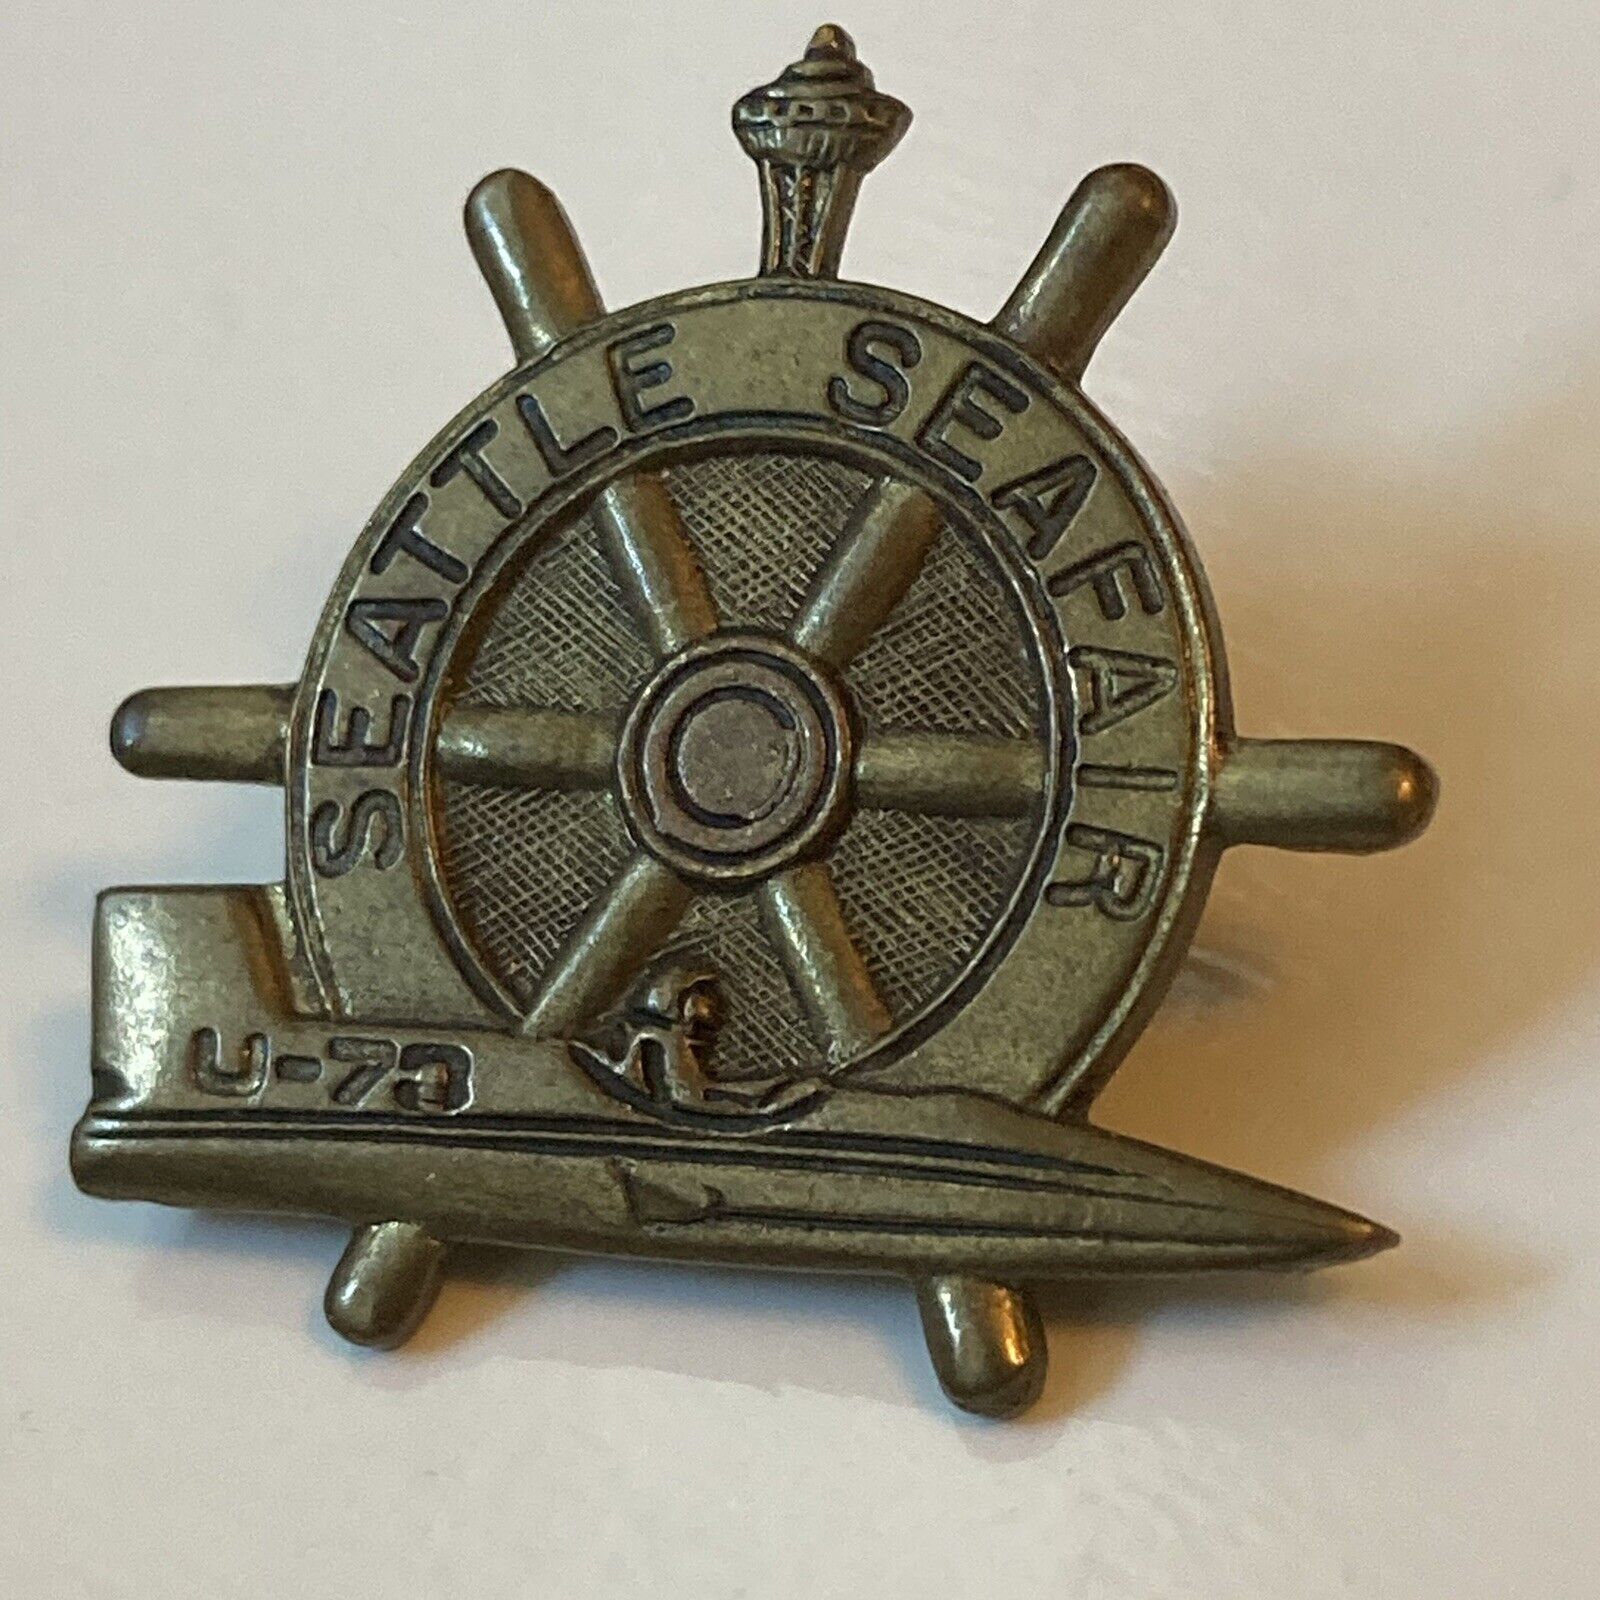 Vintage Seattle Seafair U-73 Boat Collectible Brass Tone Lapel Hat Tie Pin Tack